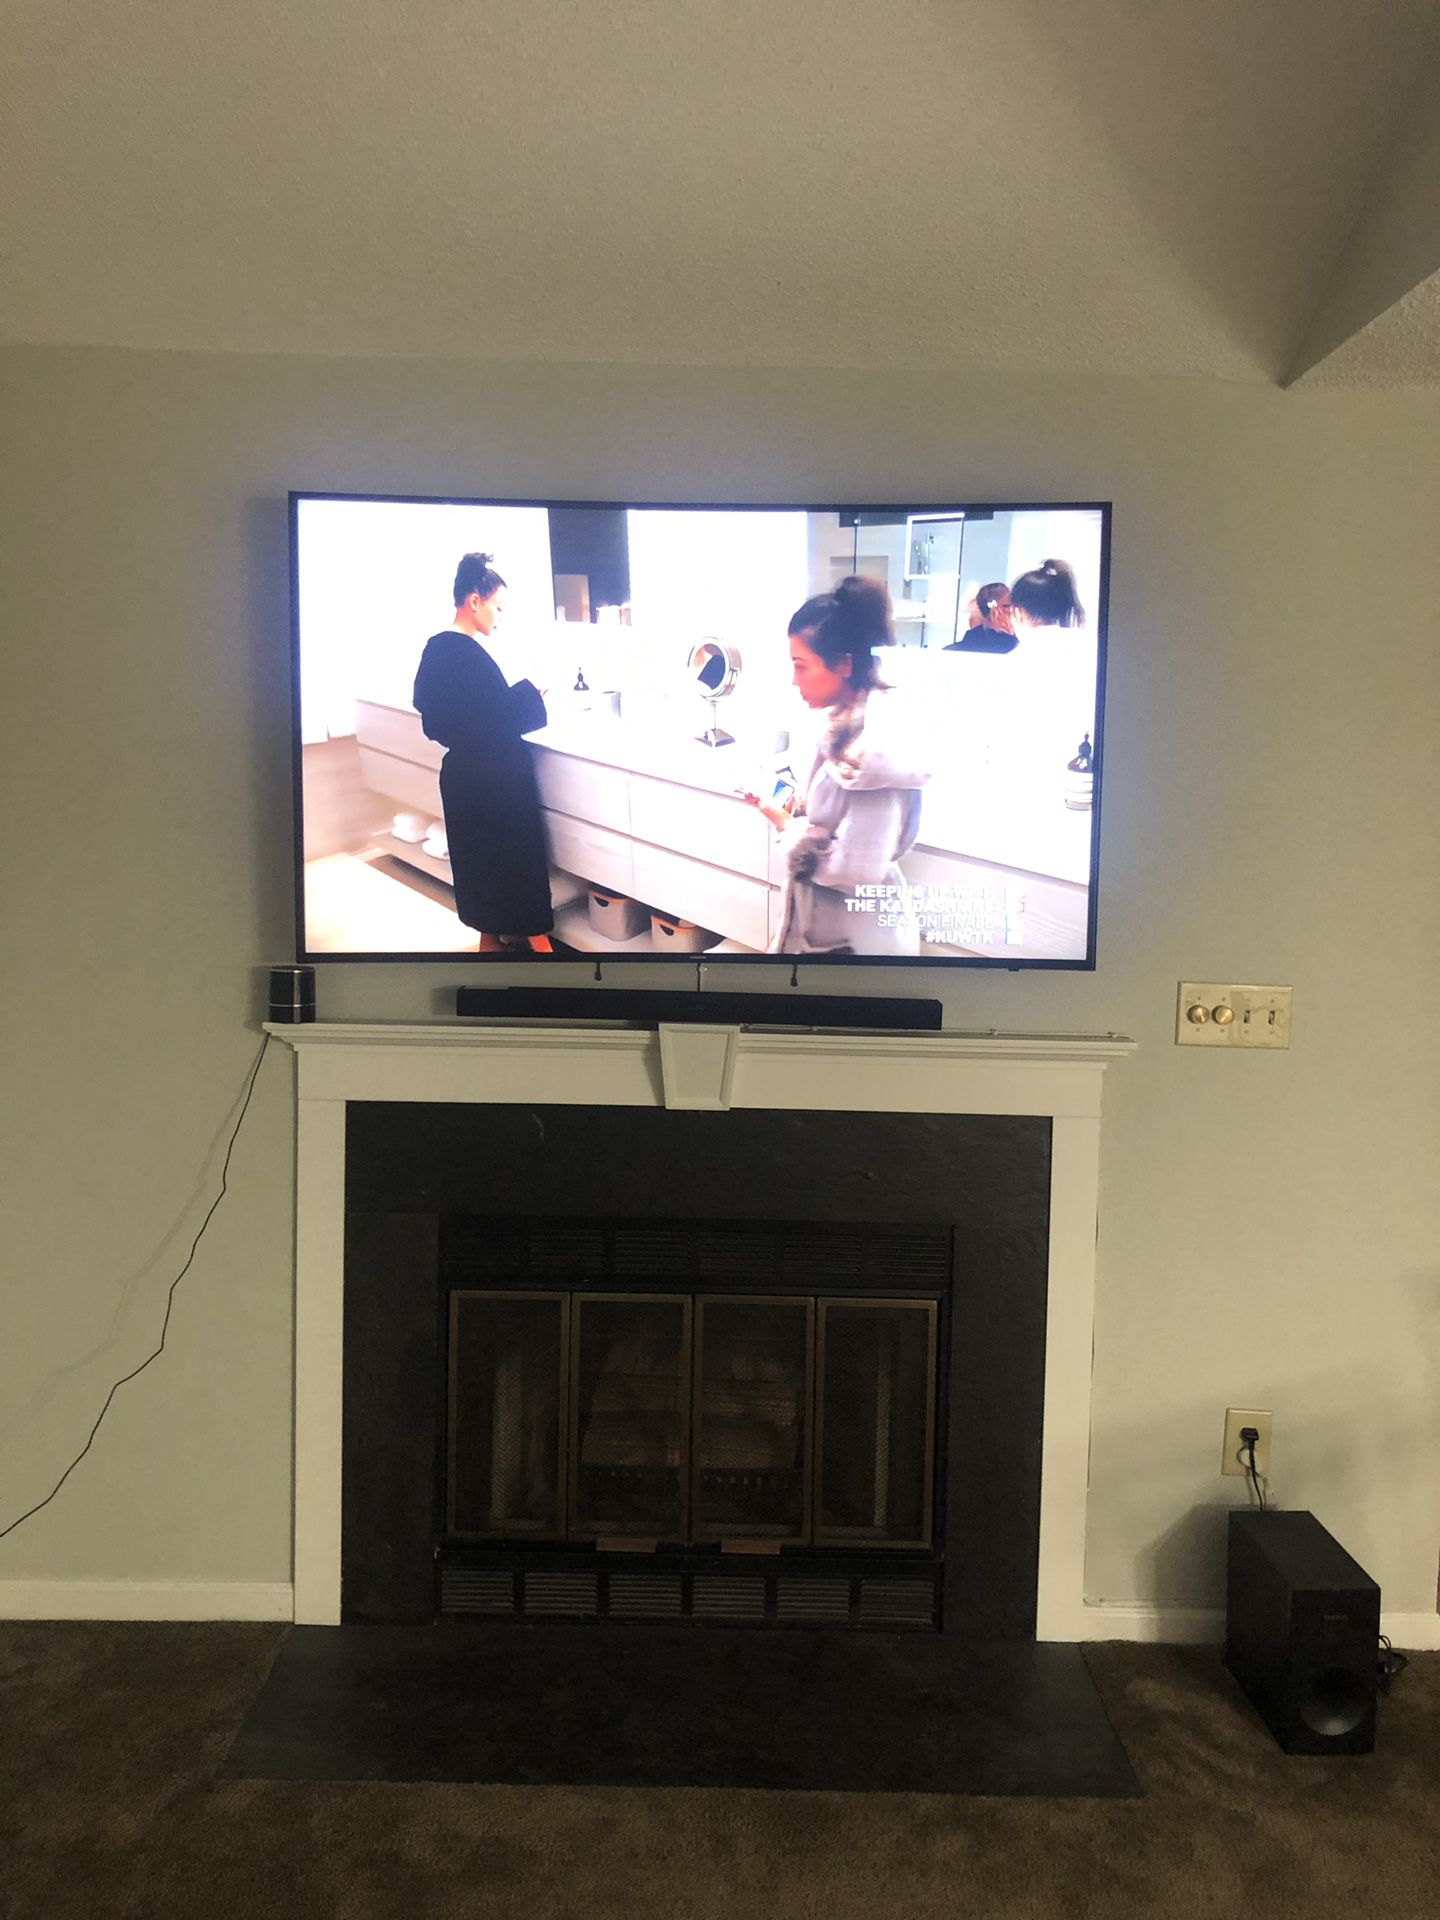 Samsung 65” curve and Samsung sound bar with extra wireless speakers